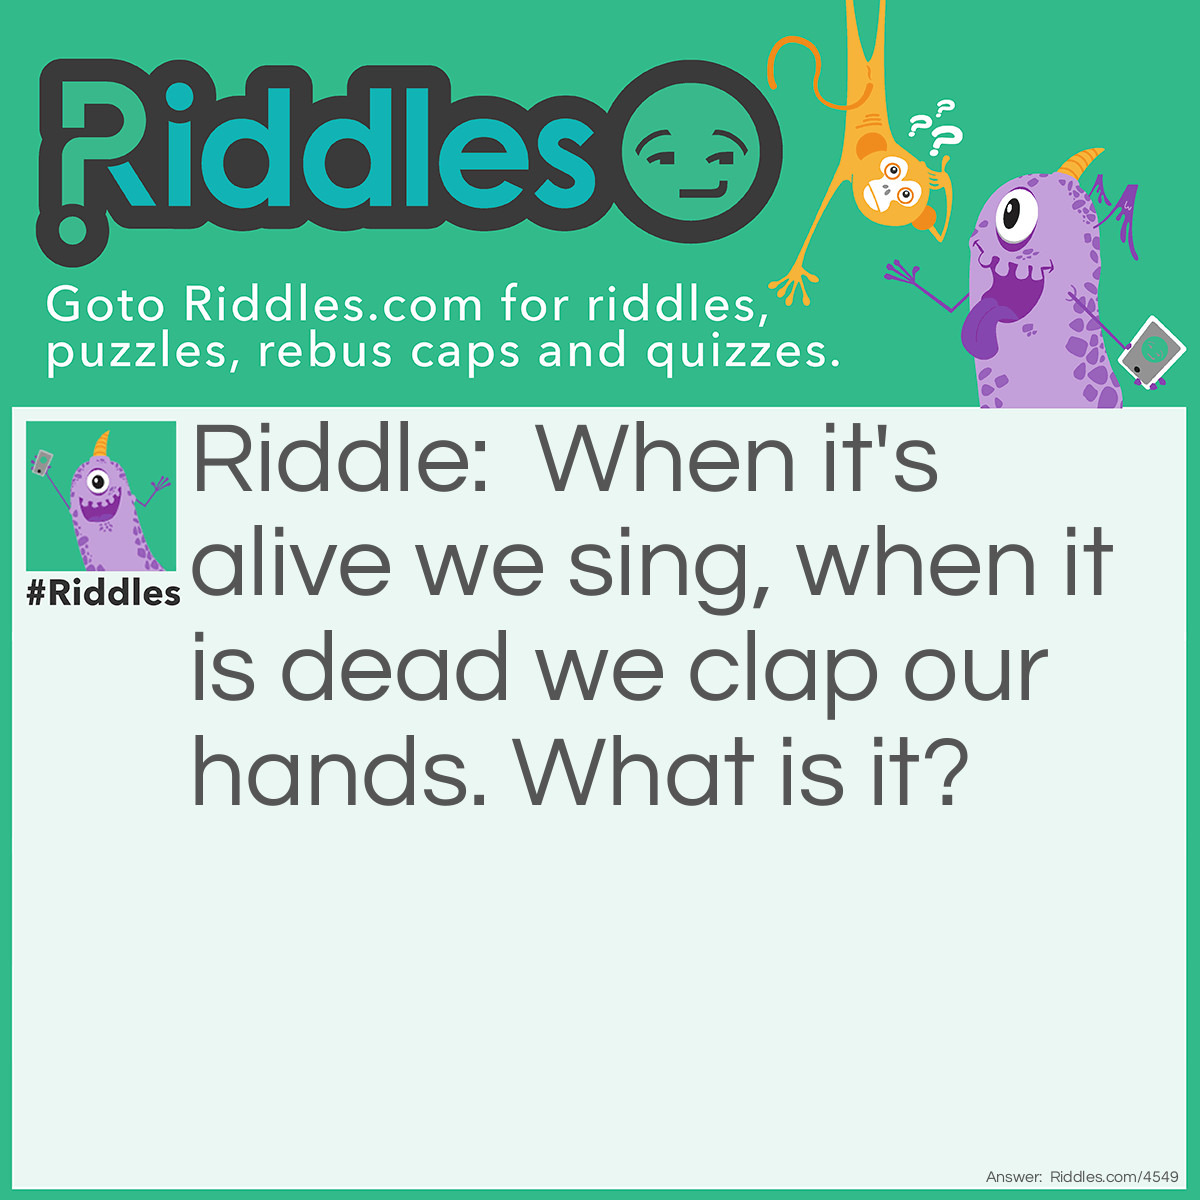 Riddle: When it's alive we sing, when it is dead we clap our hands. What is it? Answer: A birthday candle.